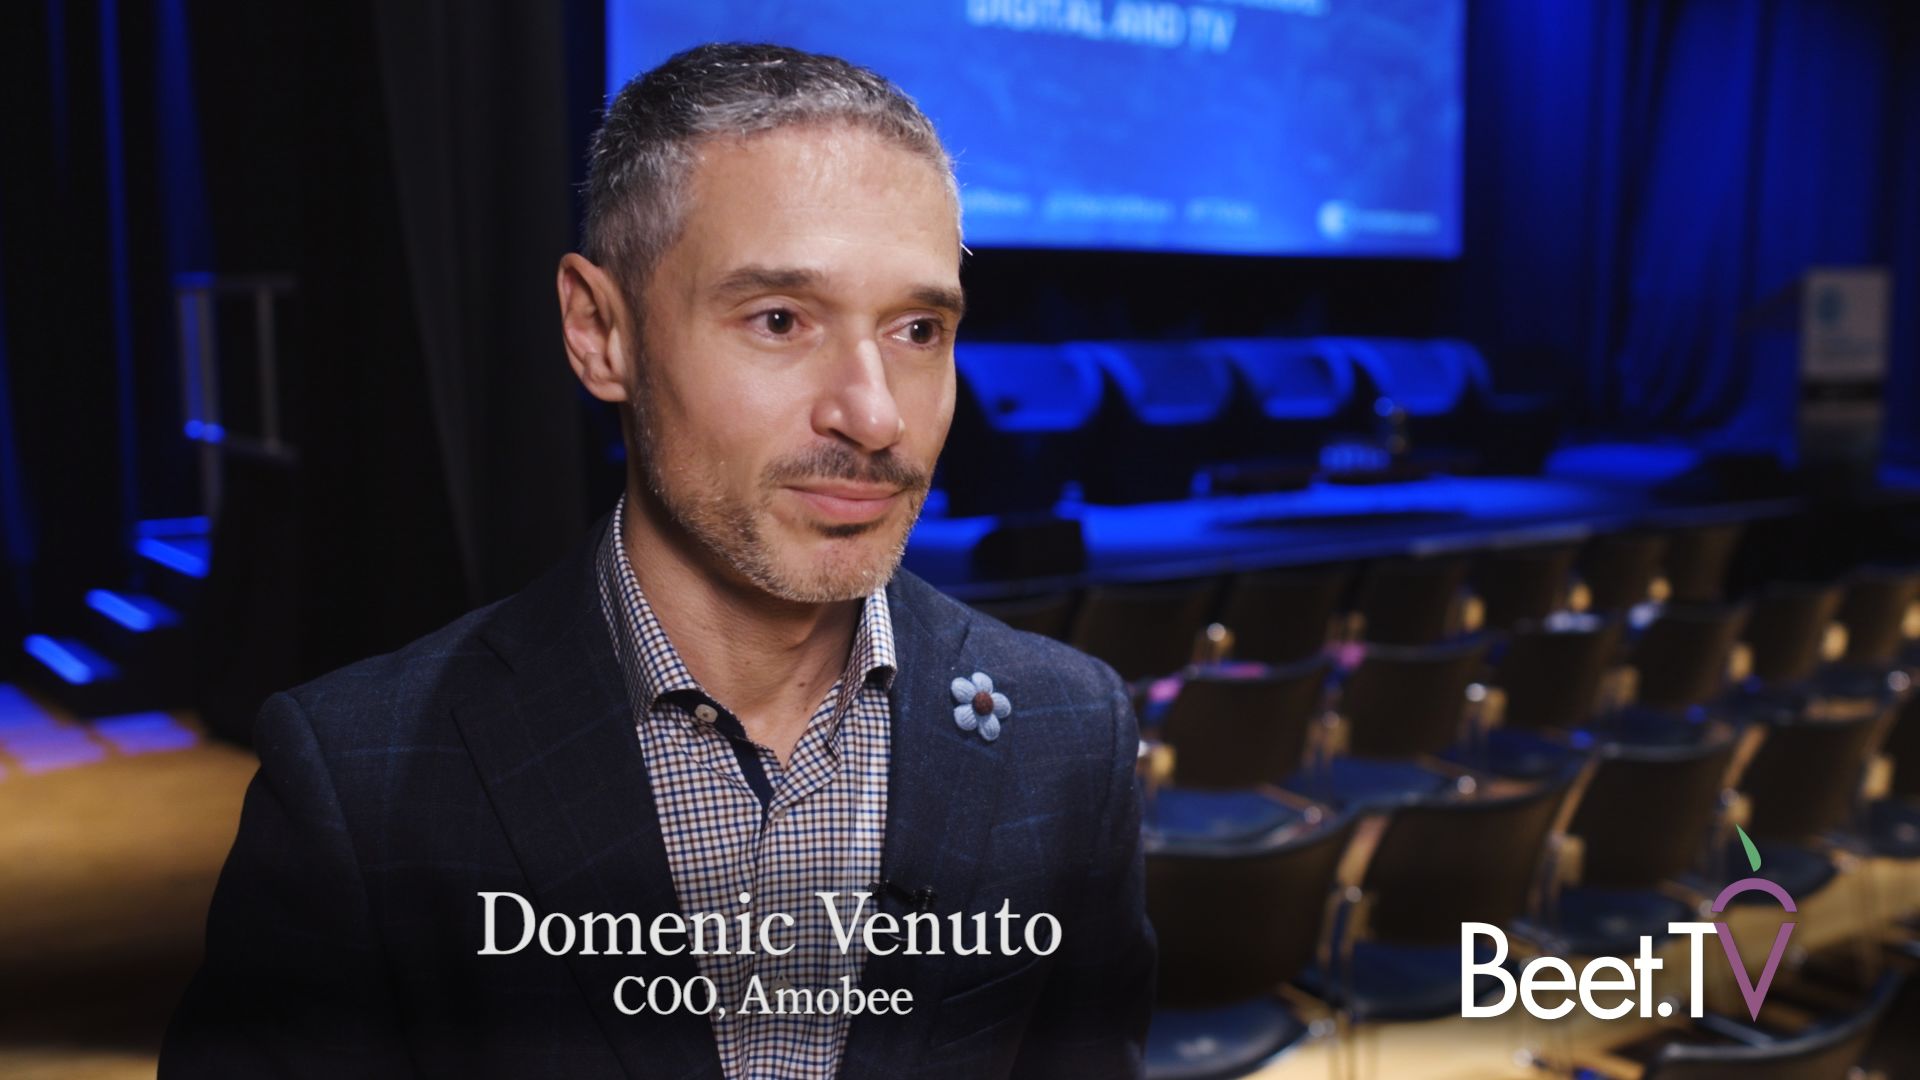 “We will be an advertising platform for the converged world,” Amobee COO Domenic Venuto